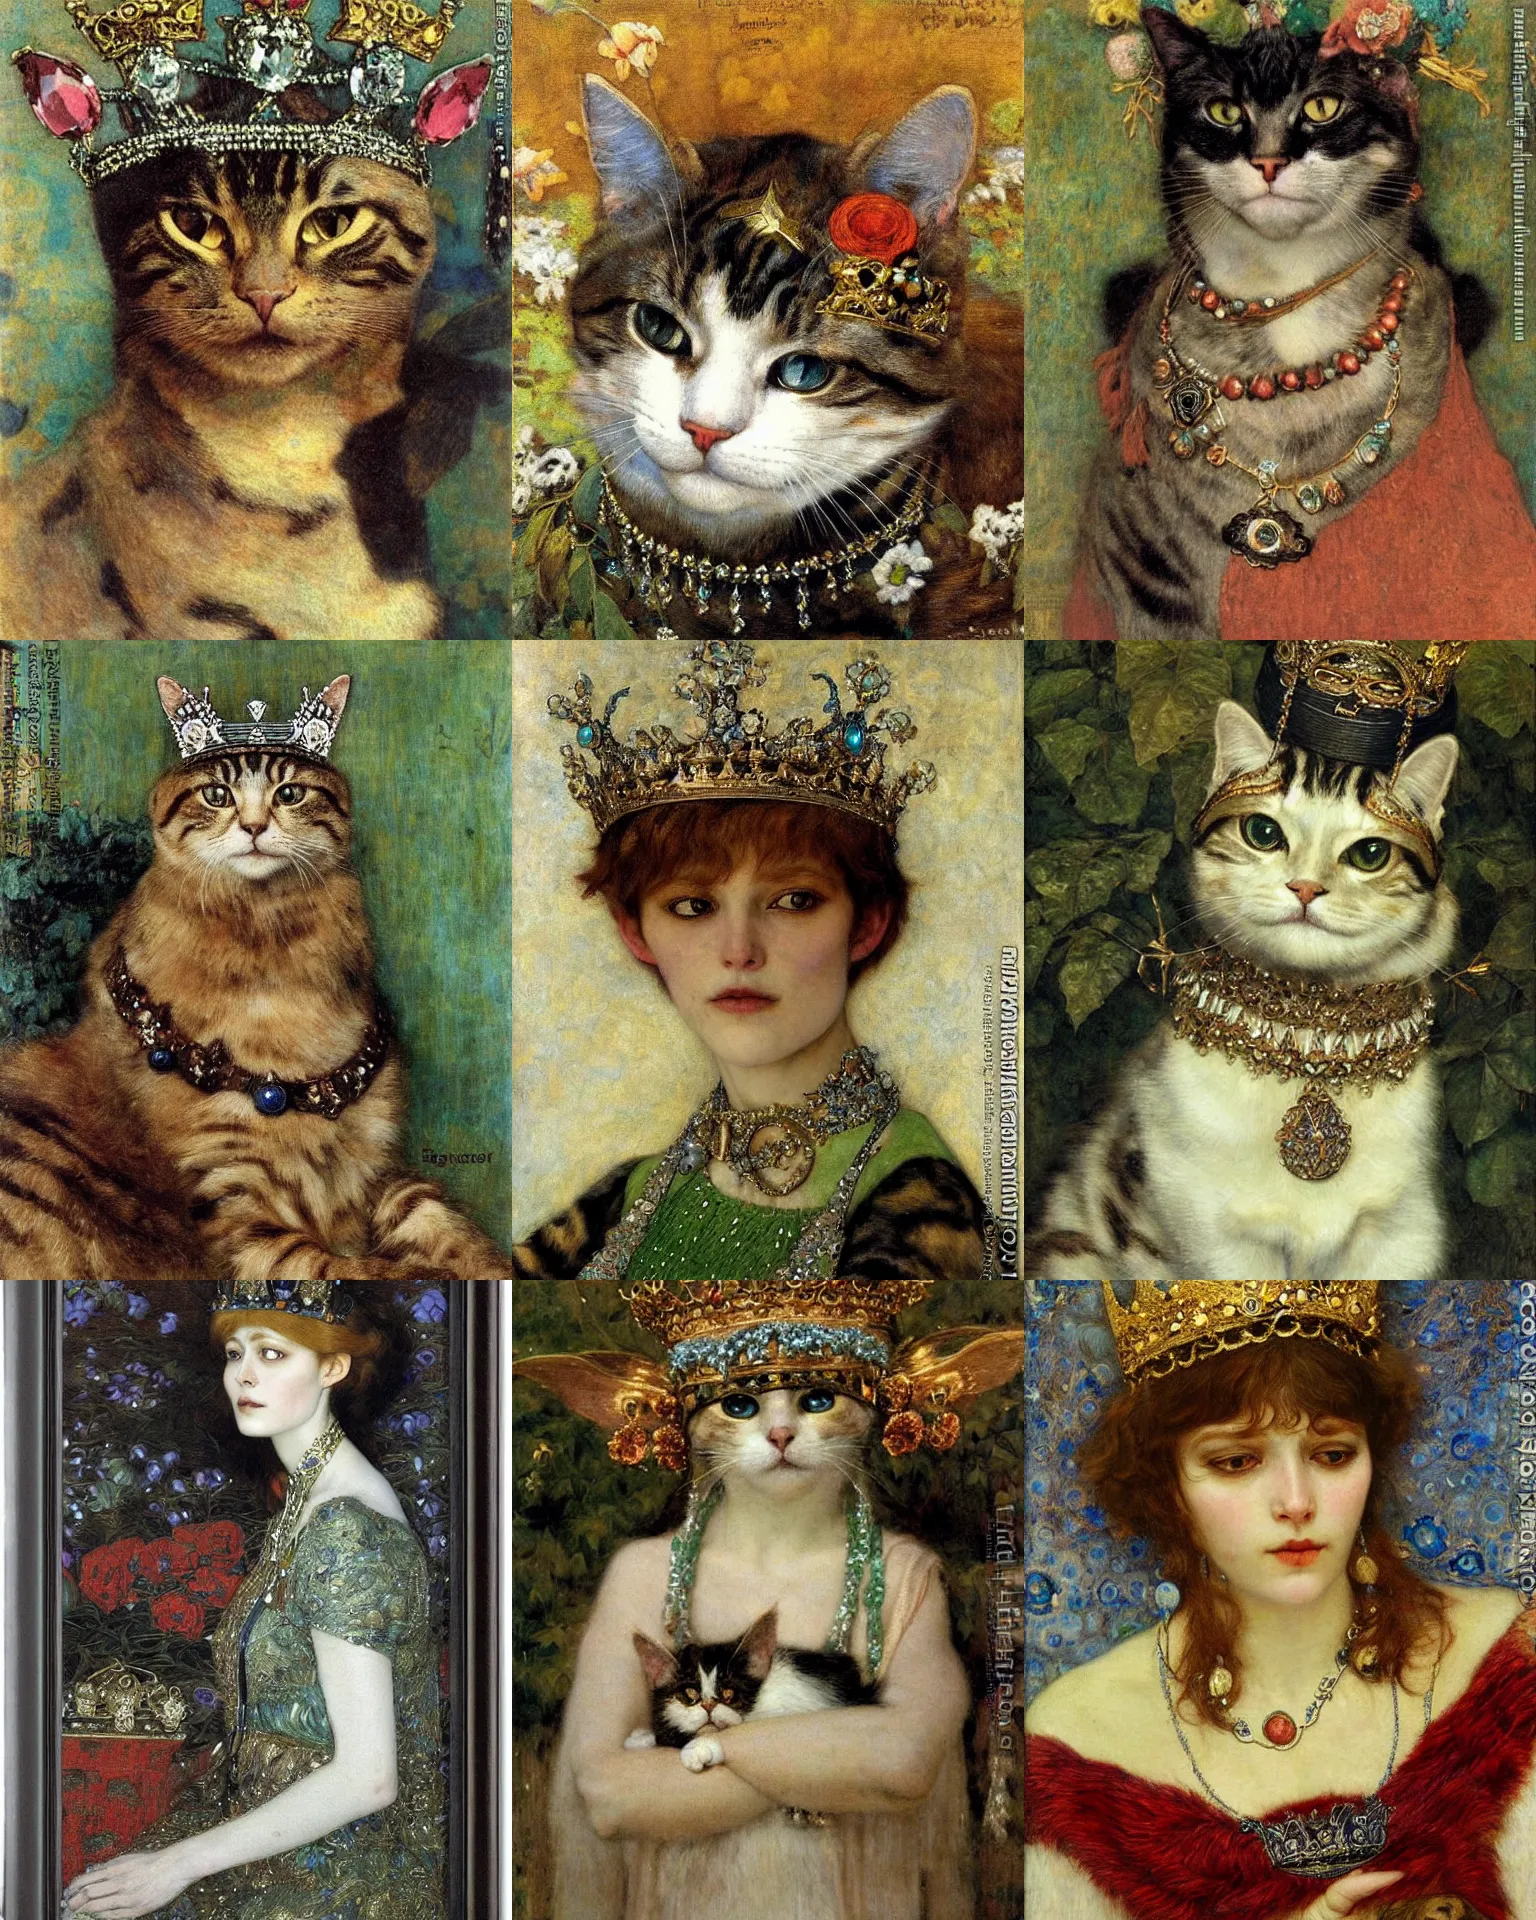 a beautiful portrait of a humanoid cat wearing jewels | Stable ...